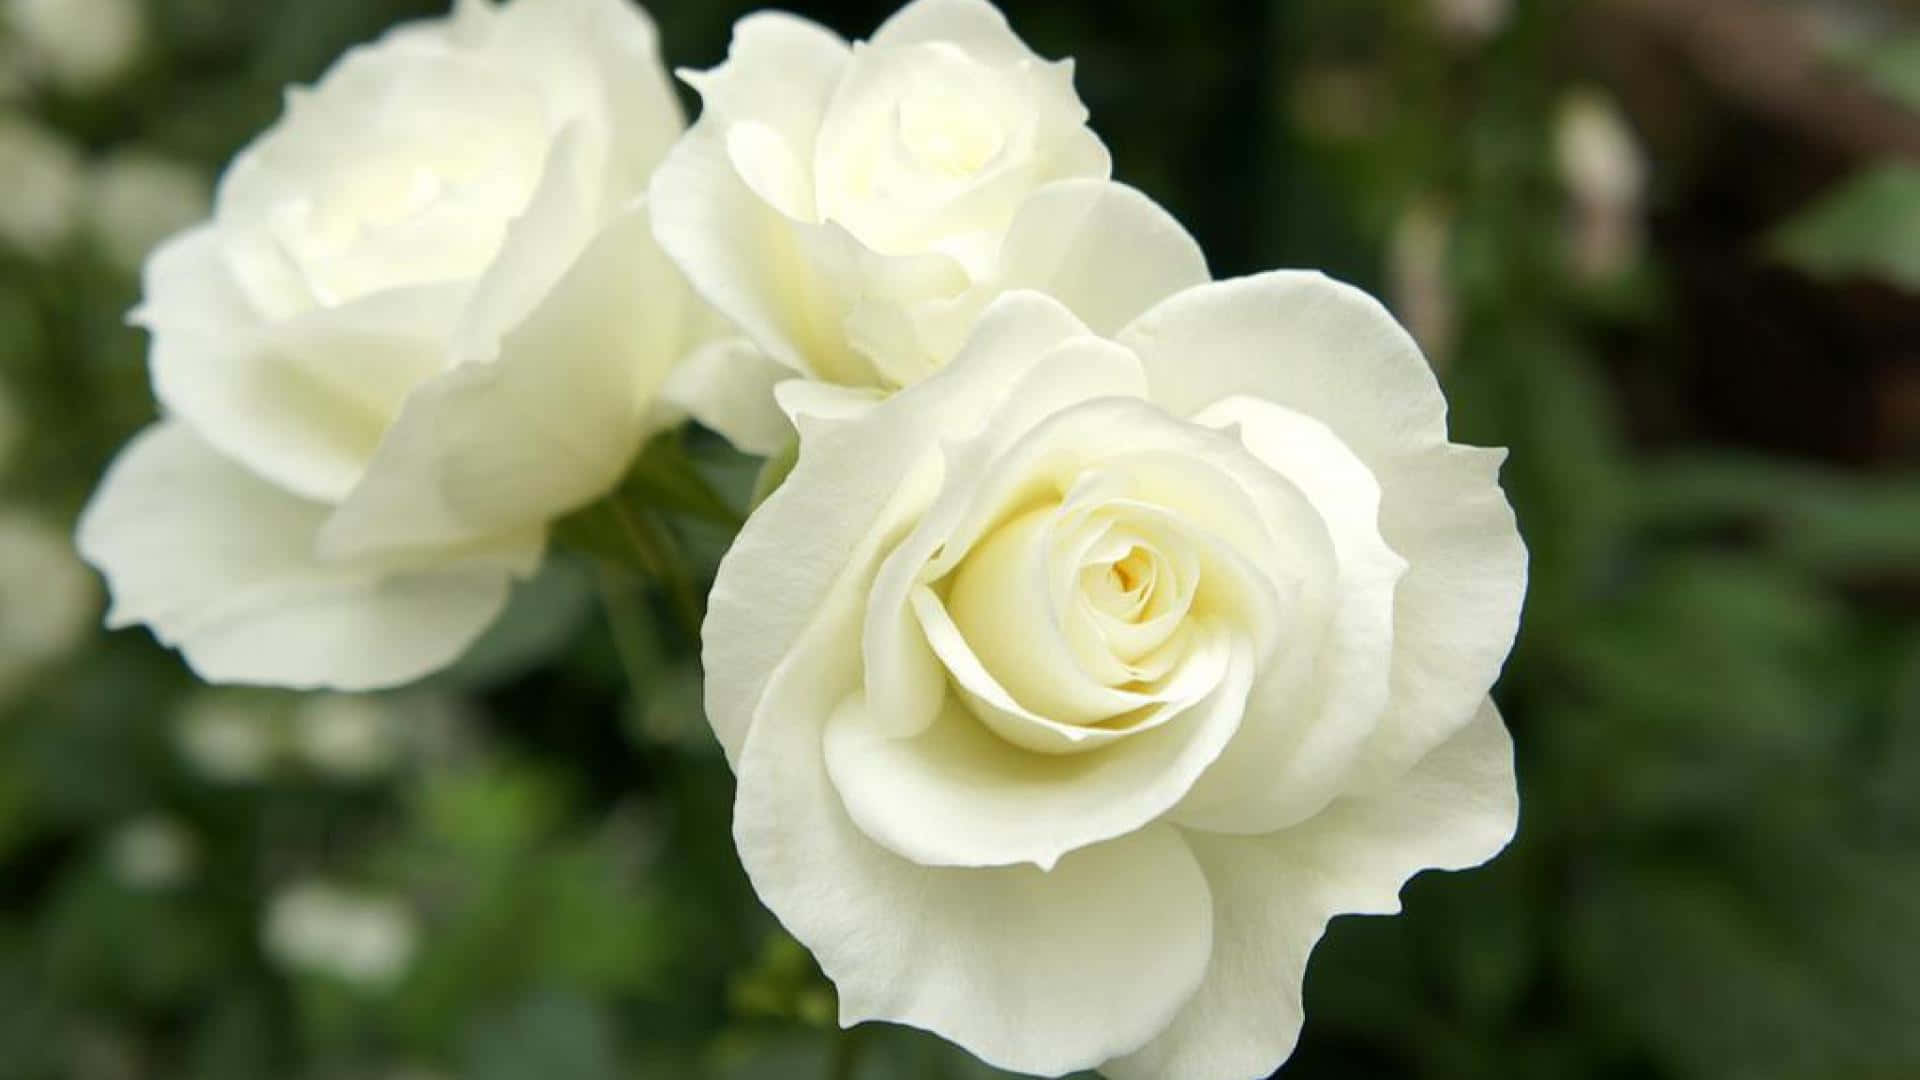 “The beauty of a White Rose” Wallpaper